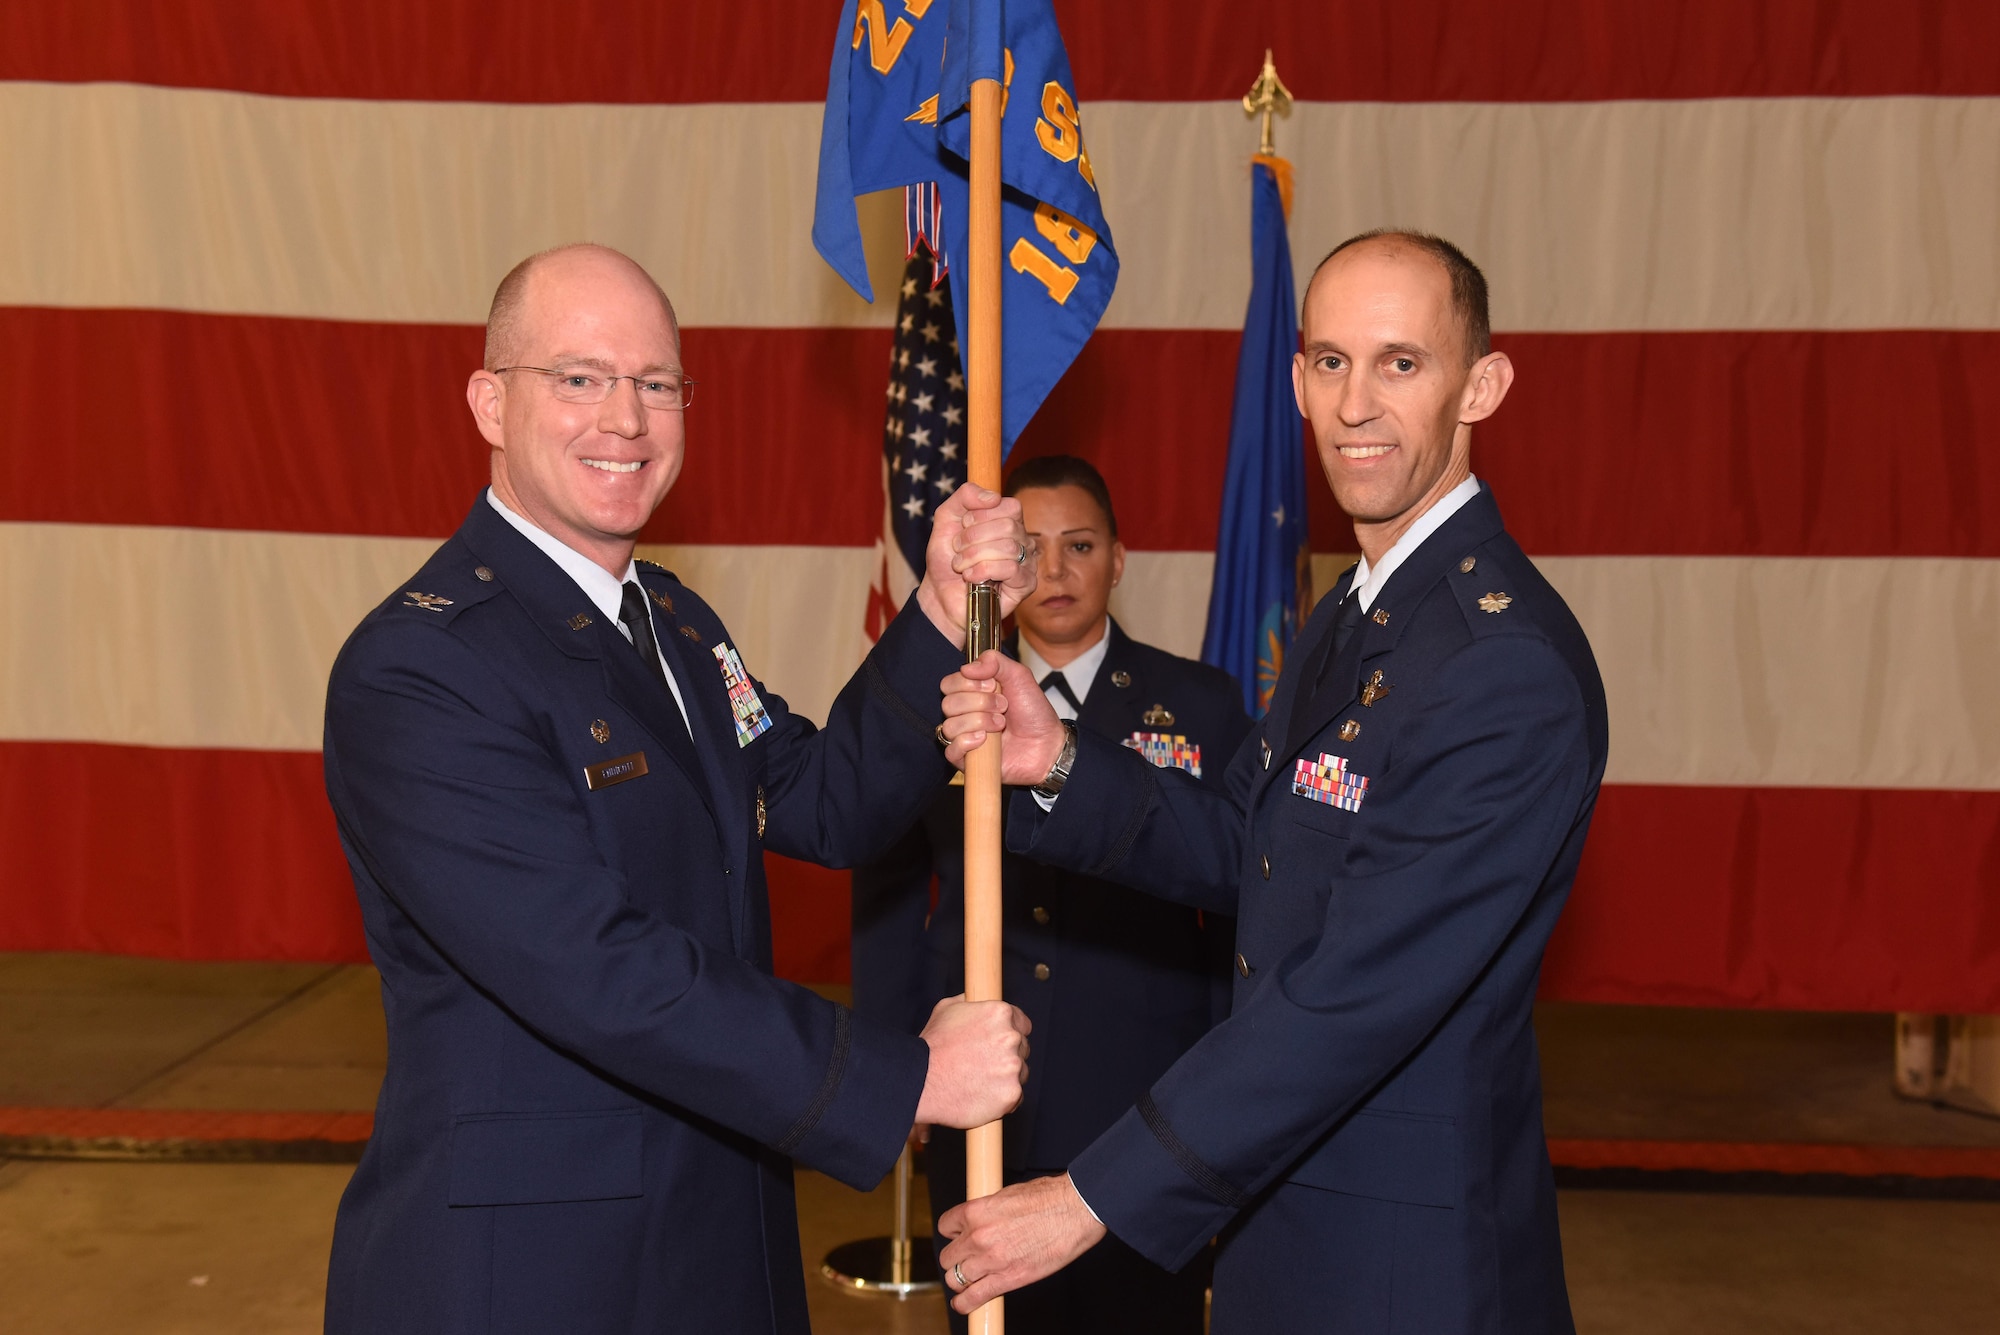 Col. Troy Endicott, 21st Operations Group commander, assigns command of the 18th Space Control Squadron to Lt. Col. Scott Putnam, 18th SPCS commander, during an assumption of command ceremony, July 22, 2016, Vandenberg Air Force Base, Calif. Putnam assumed command of the 18th SPCS, the newest space surveillance unit that will fall under the 21st Space Wing.